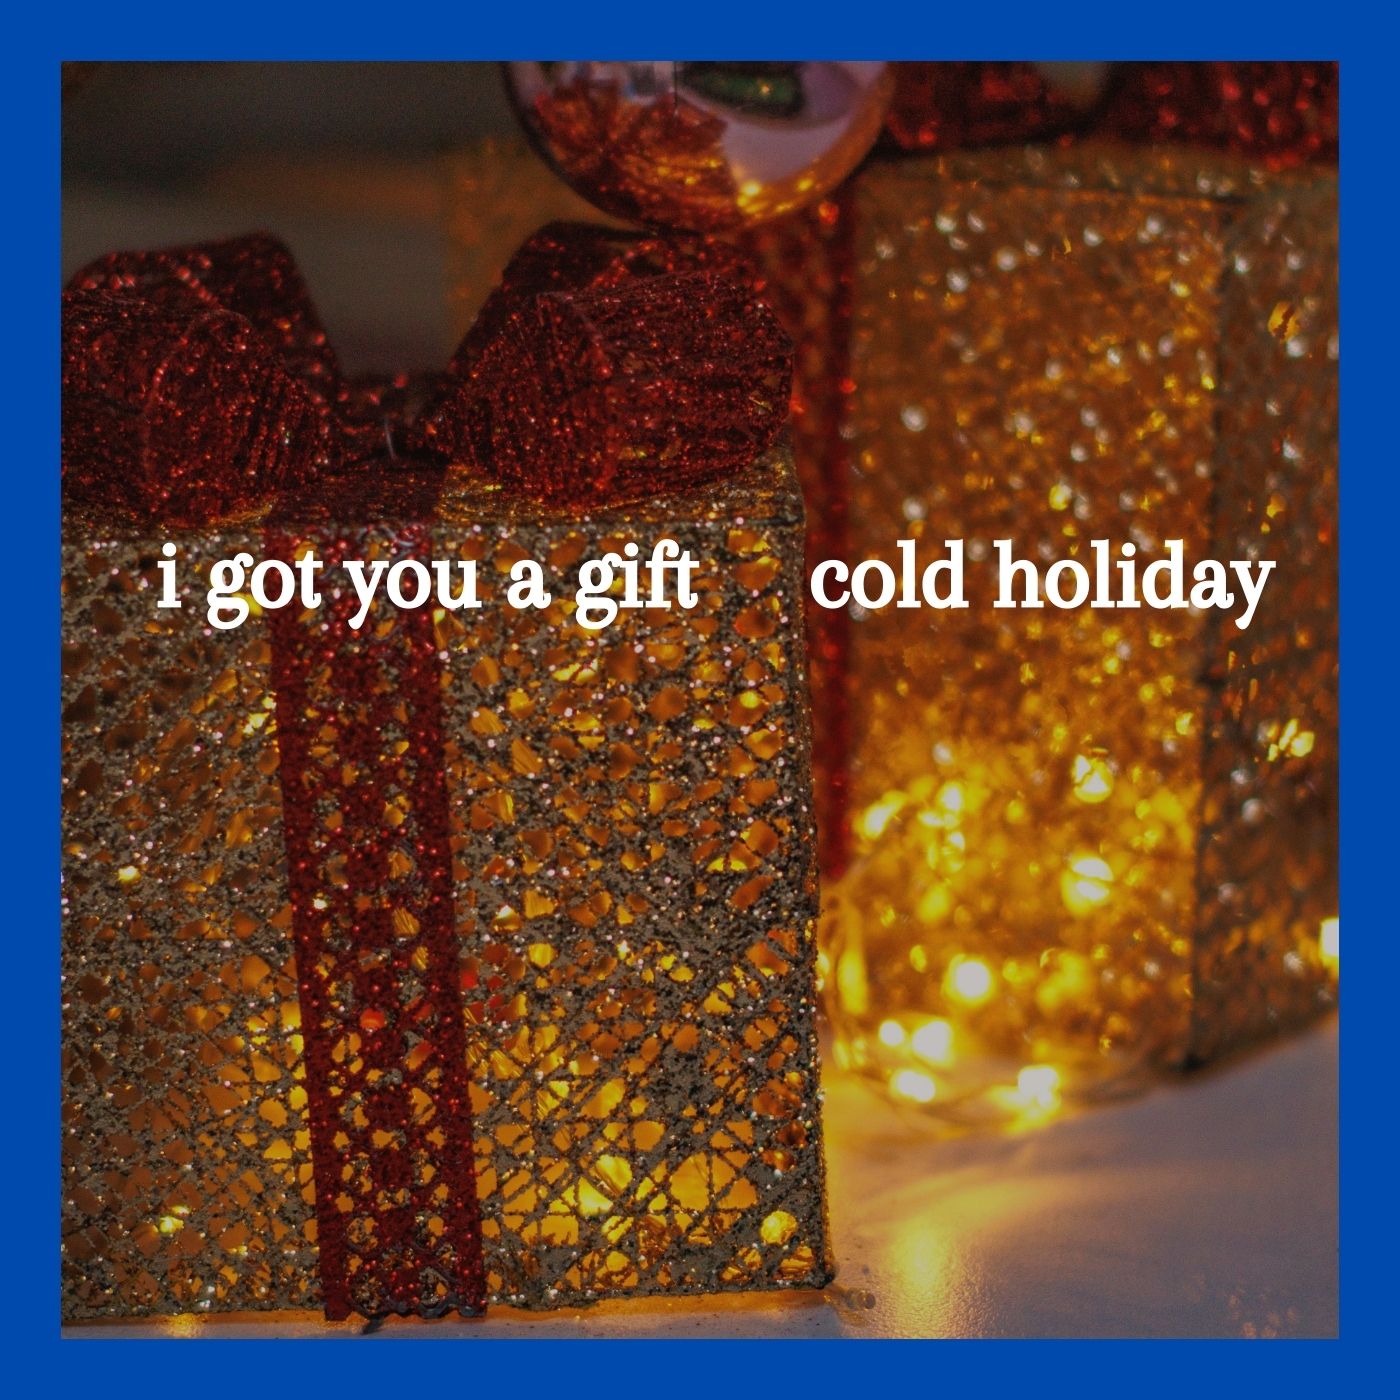 The cover of "I Got You A Gift" by Cold Holiday shows two glittery gold presents with red ribbon, illuminated by white lights. Photo by Daniel Kondrashin via Pexels https://www.pexels.com/photo/christmas-ball-beside-glittery-gift-boxes-in-close-up-view-14543809/